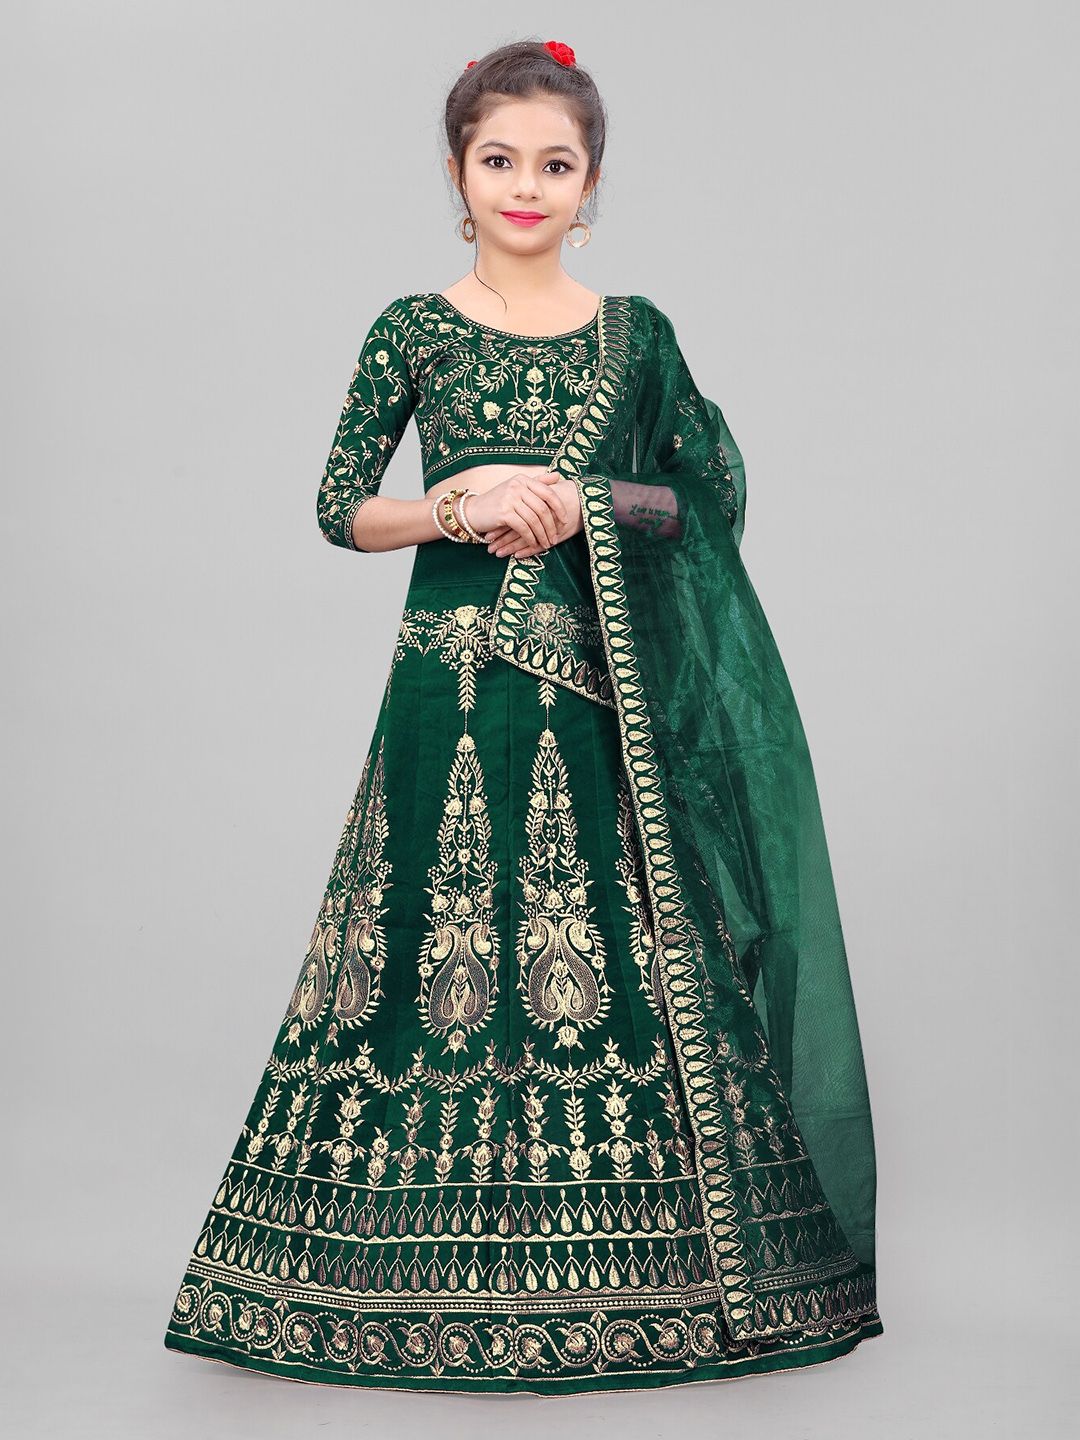 BAESD Girls Green Embroidered Thread Work Semi-Stitched Lehenga & Unstitched Blouse With Dupatta Price in India